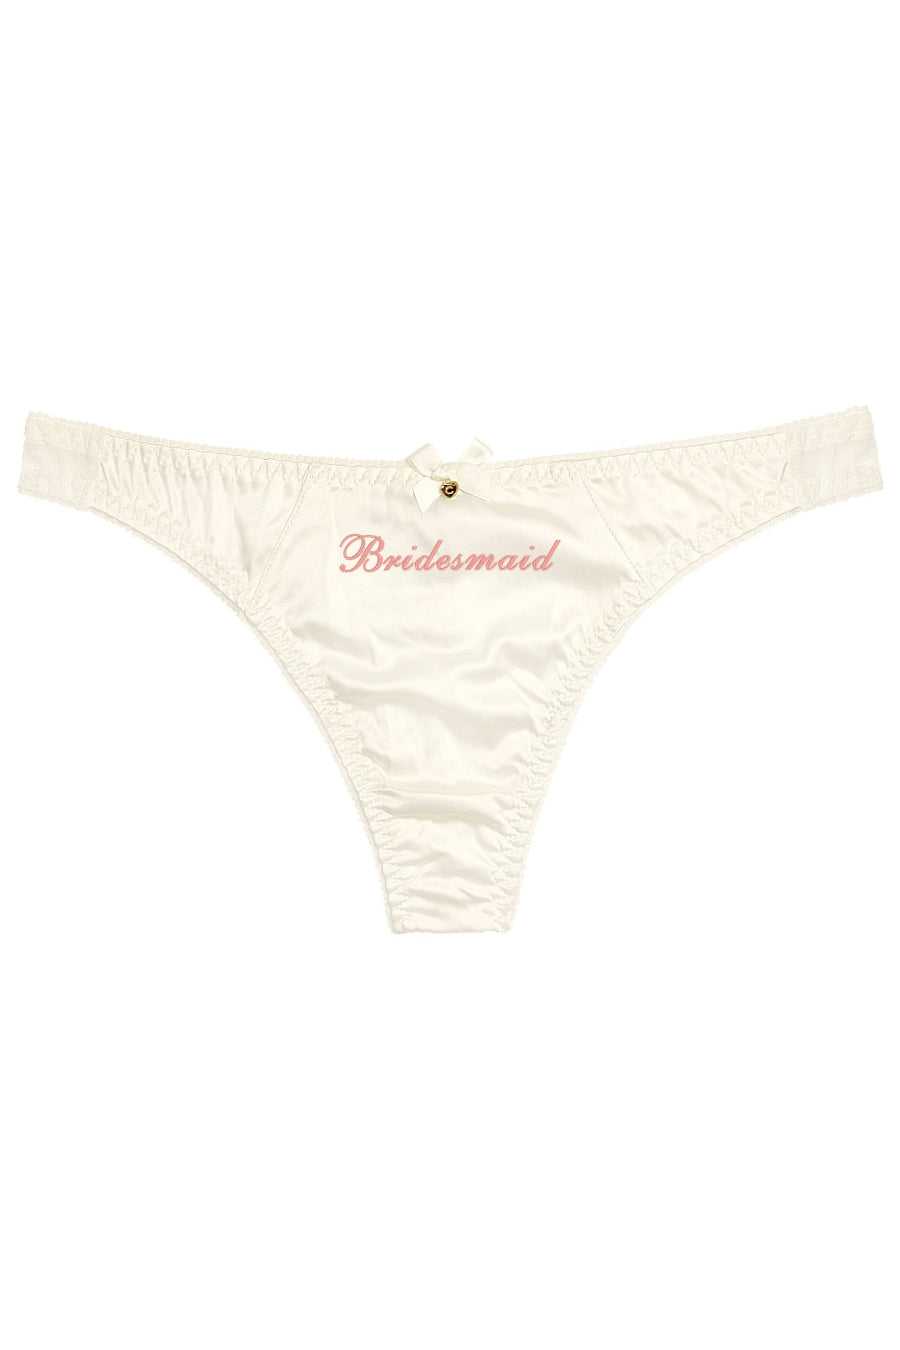 Bridesmaid: Embroidered Knickers